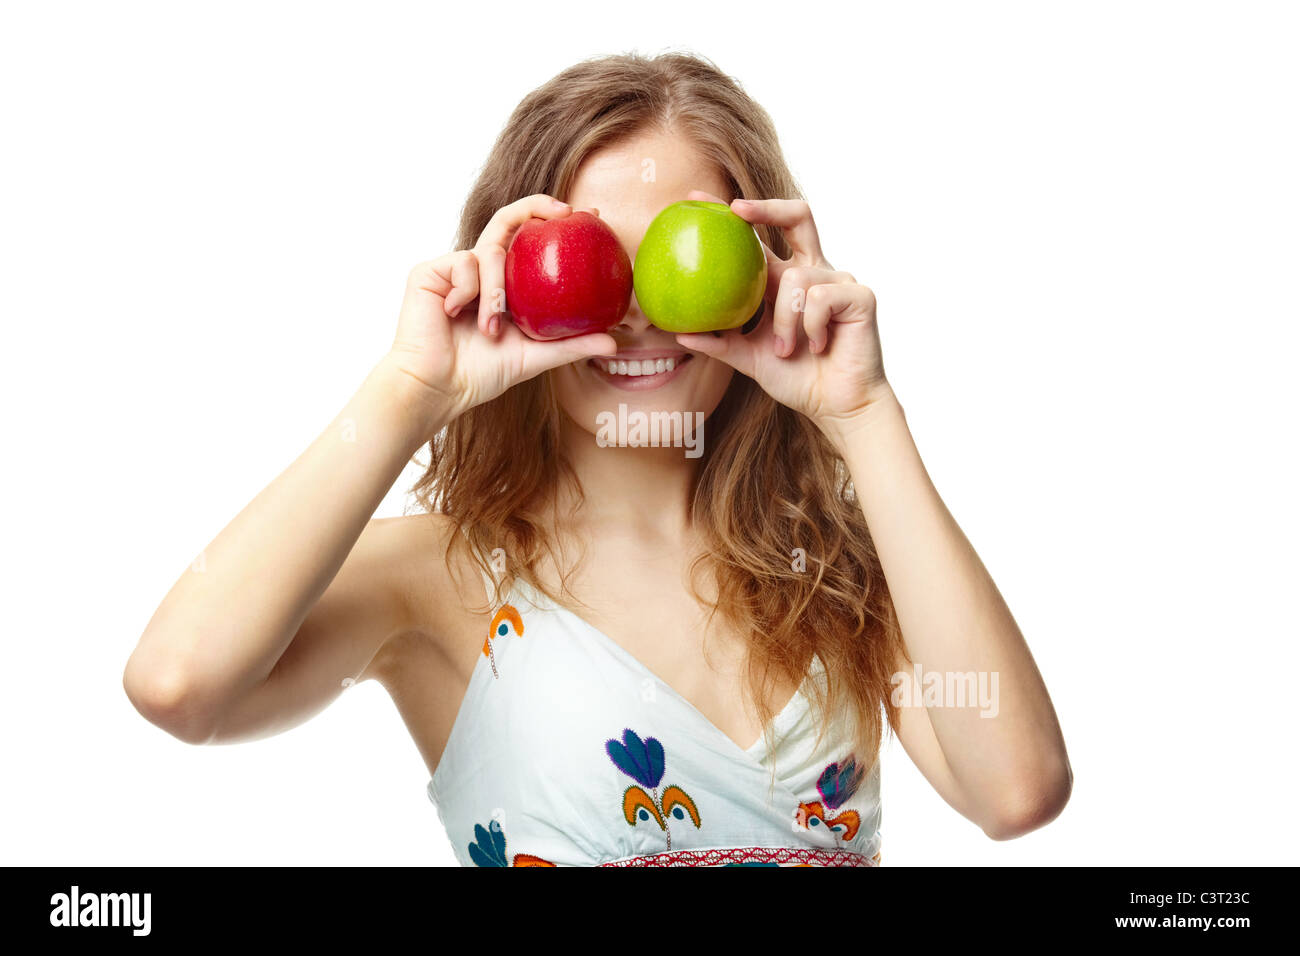 Portrait of a girl covering her eyes with apples Stock Photo